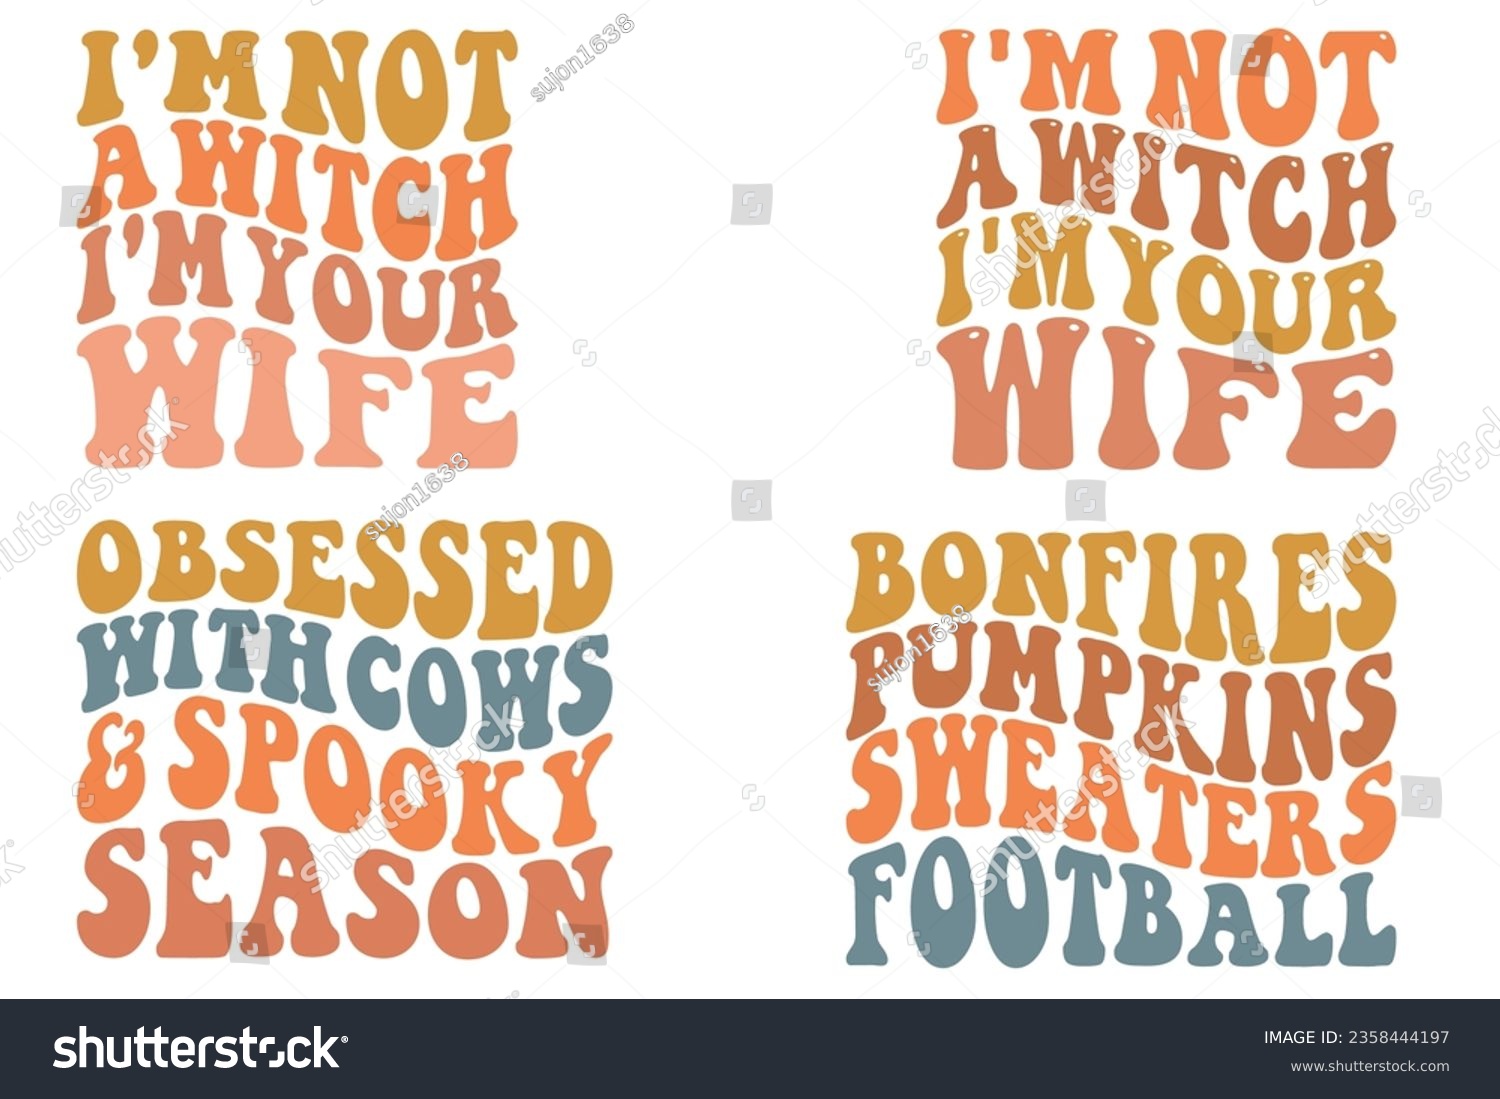 SVG of I'm Not A Witch I'm Your Wife, Obsessed with Cows and Spooky Season, Bonfires Pumpkins Sweaters Football retro wavy SVG bundle T-shirt design svg